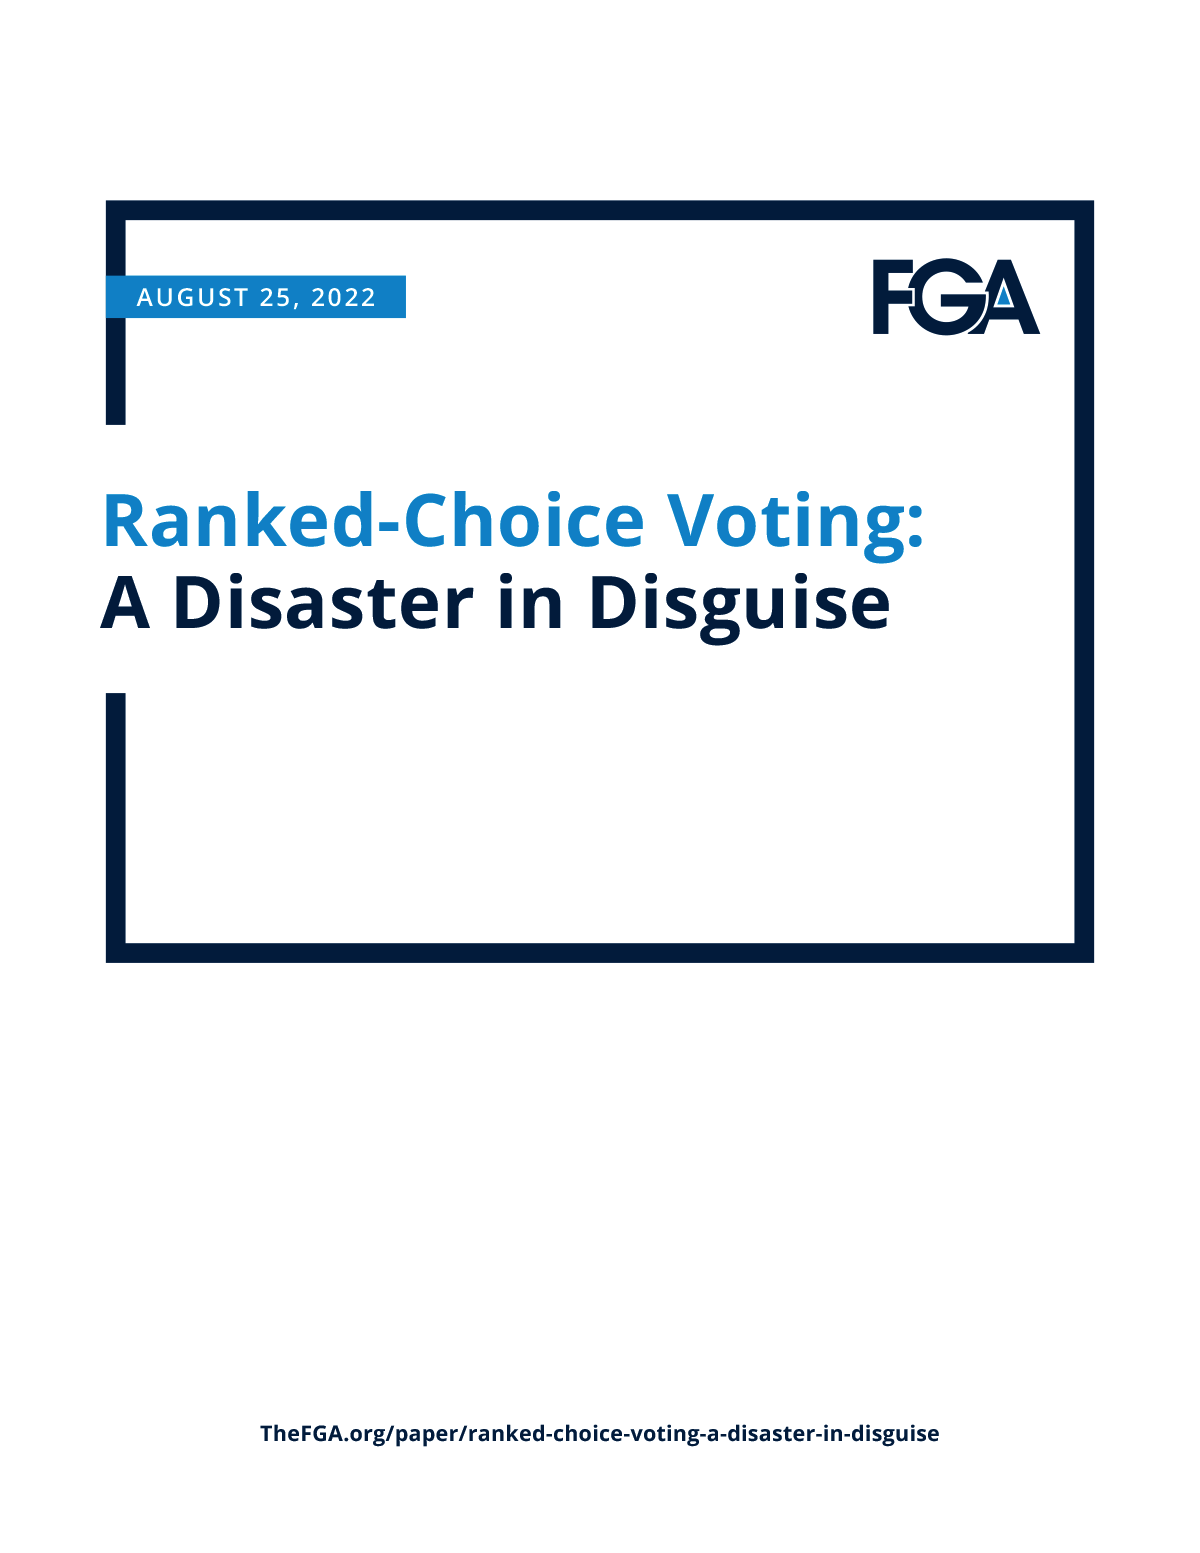 Ranked-Choice Voting: A Disaster in Disguise